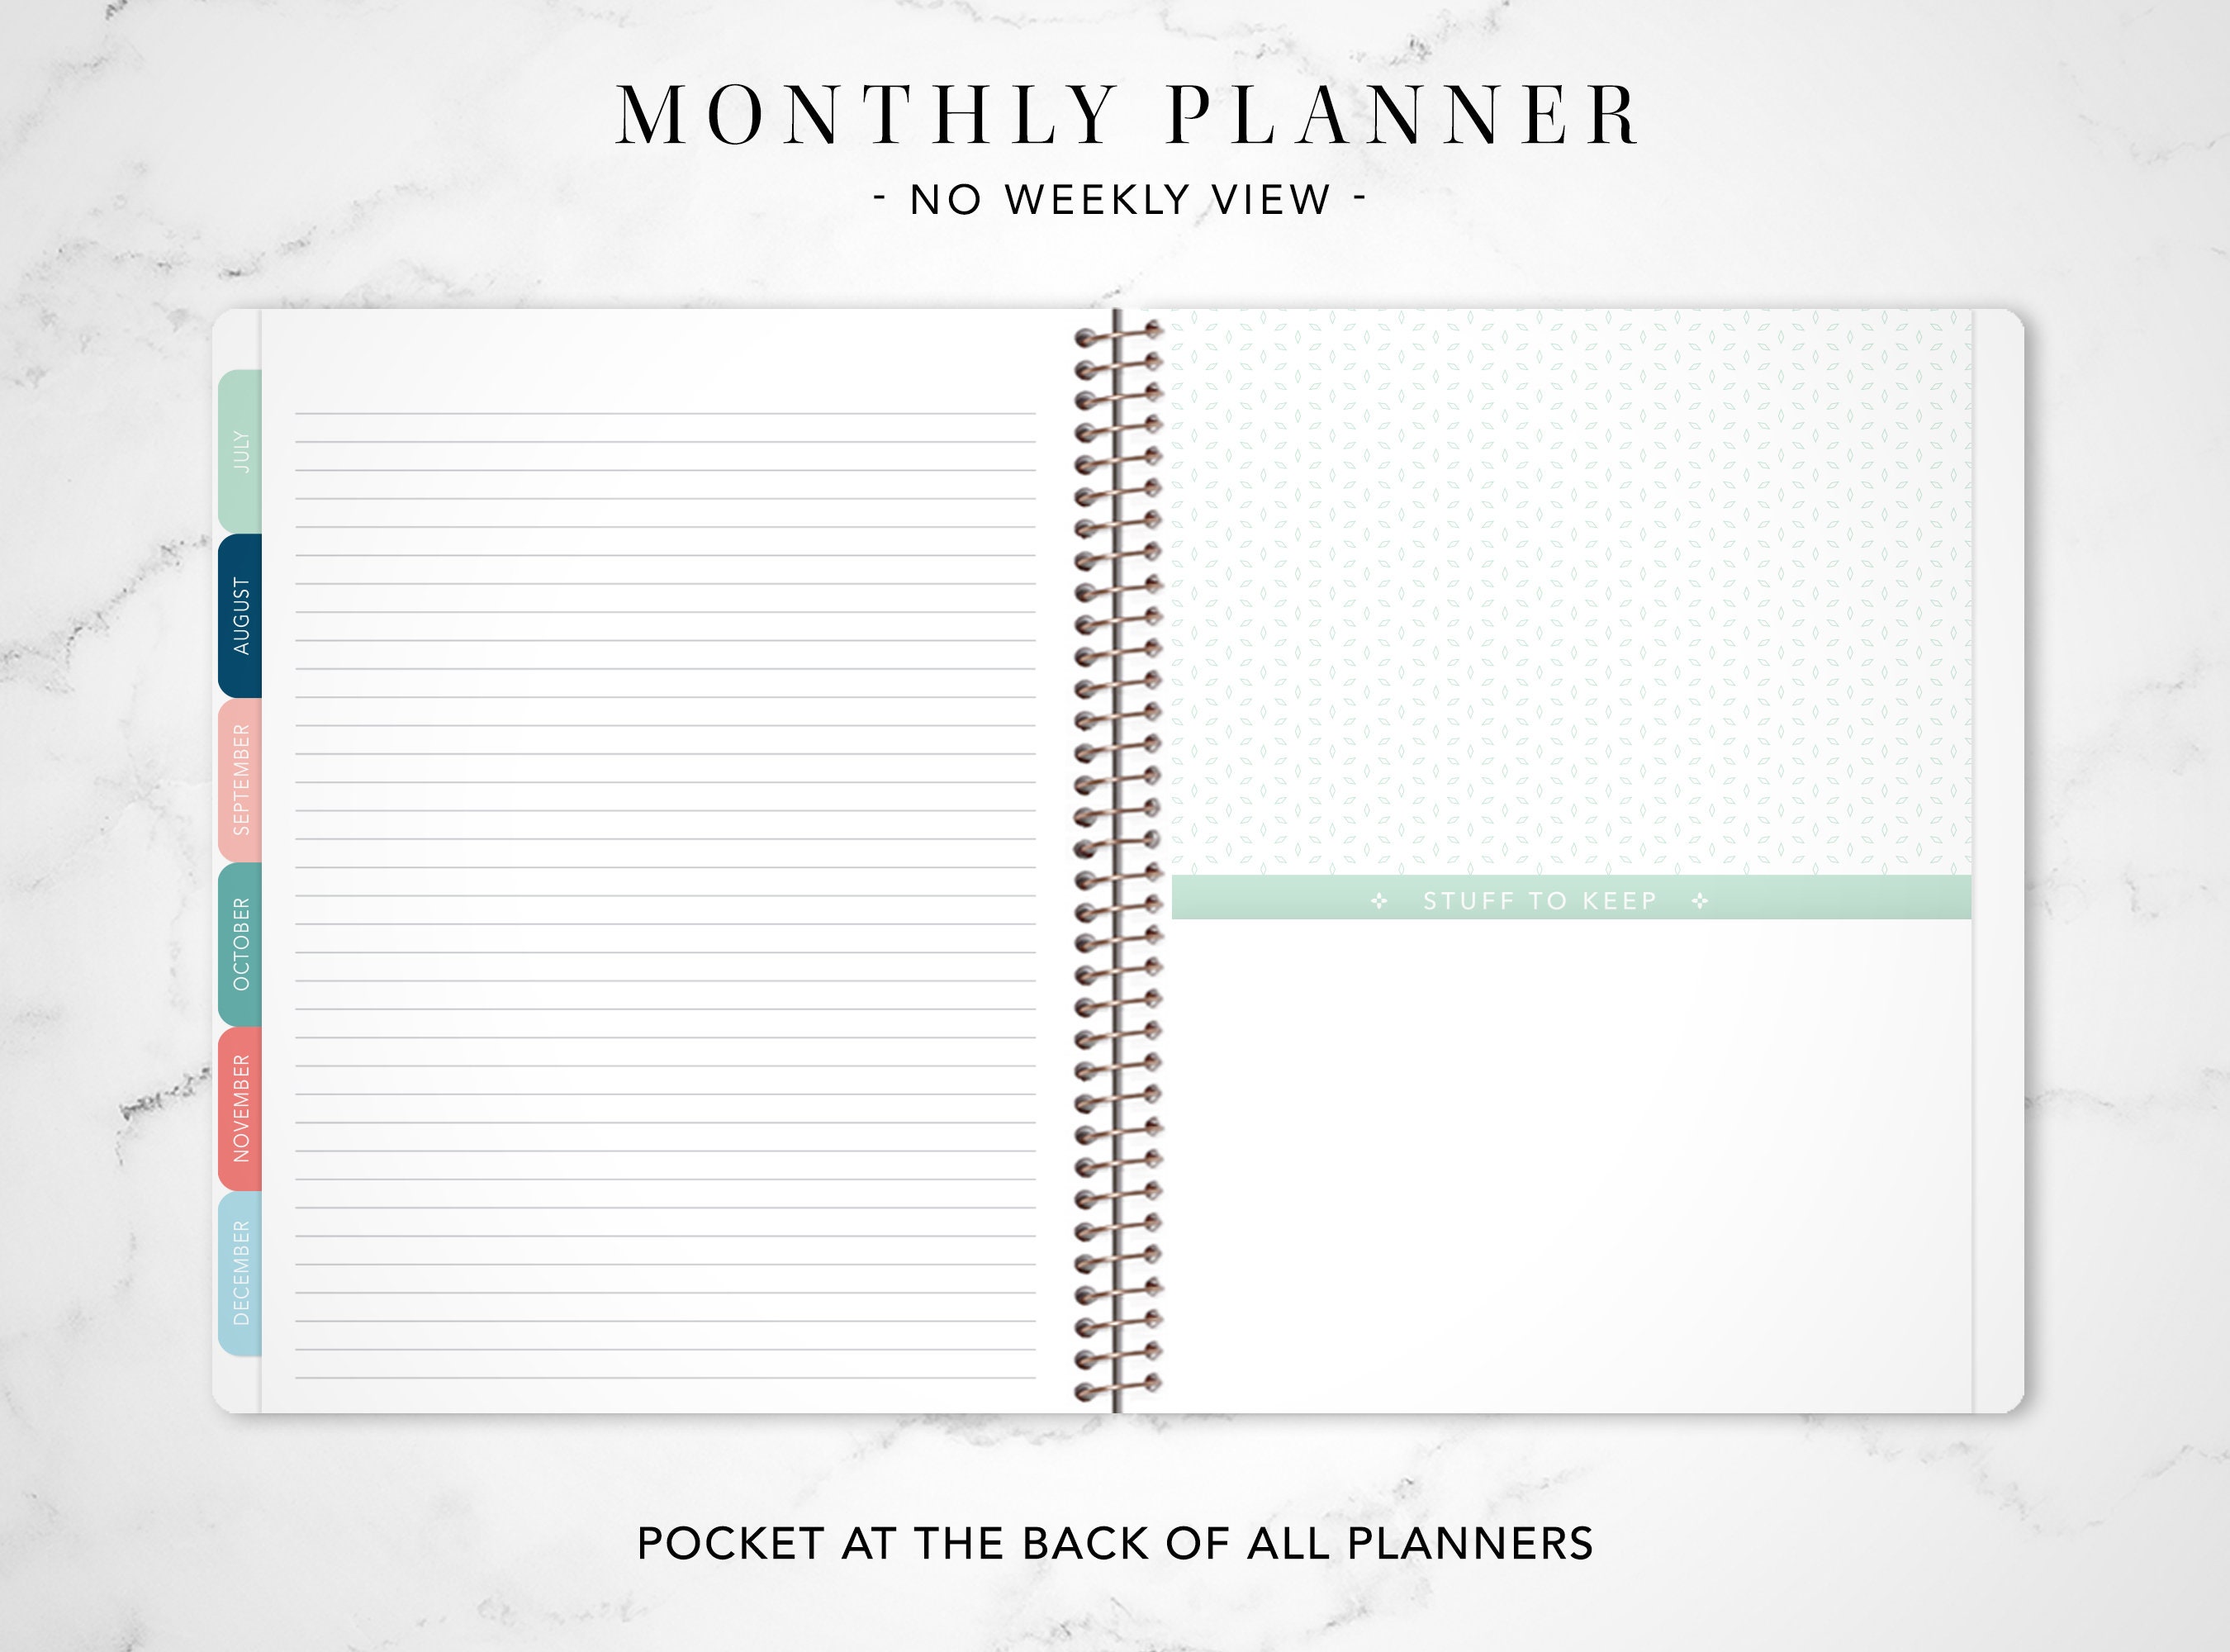 Daily Weekly & Monthly Planner 2024: From January to December - 12 Months  Calendar, To do list